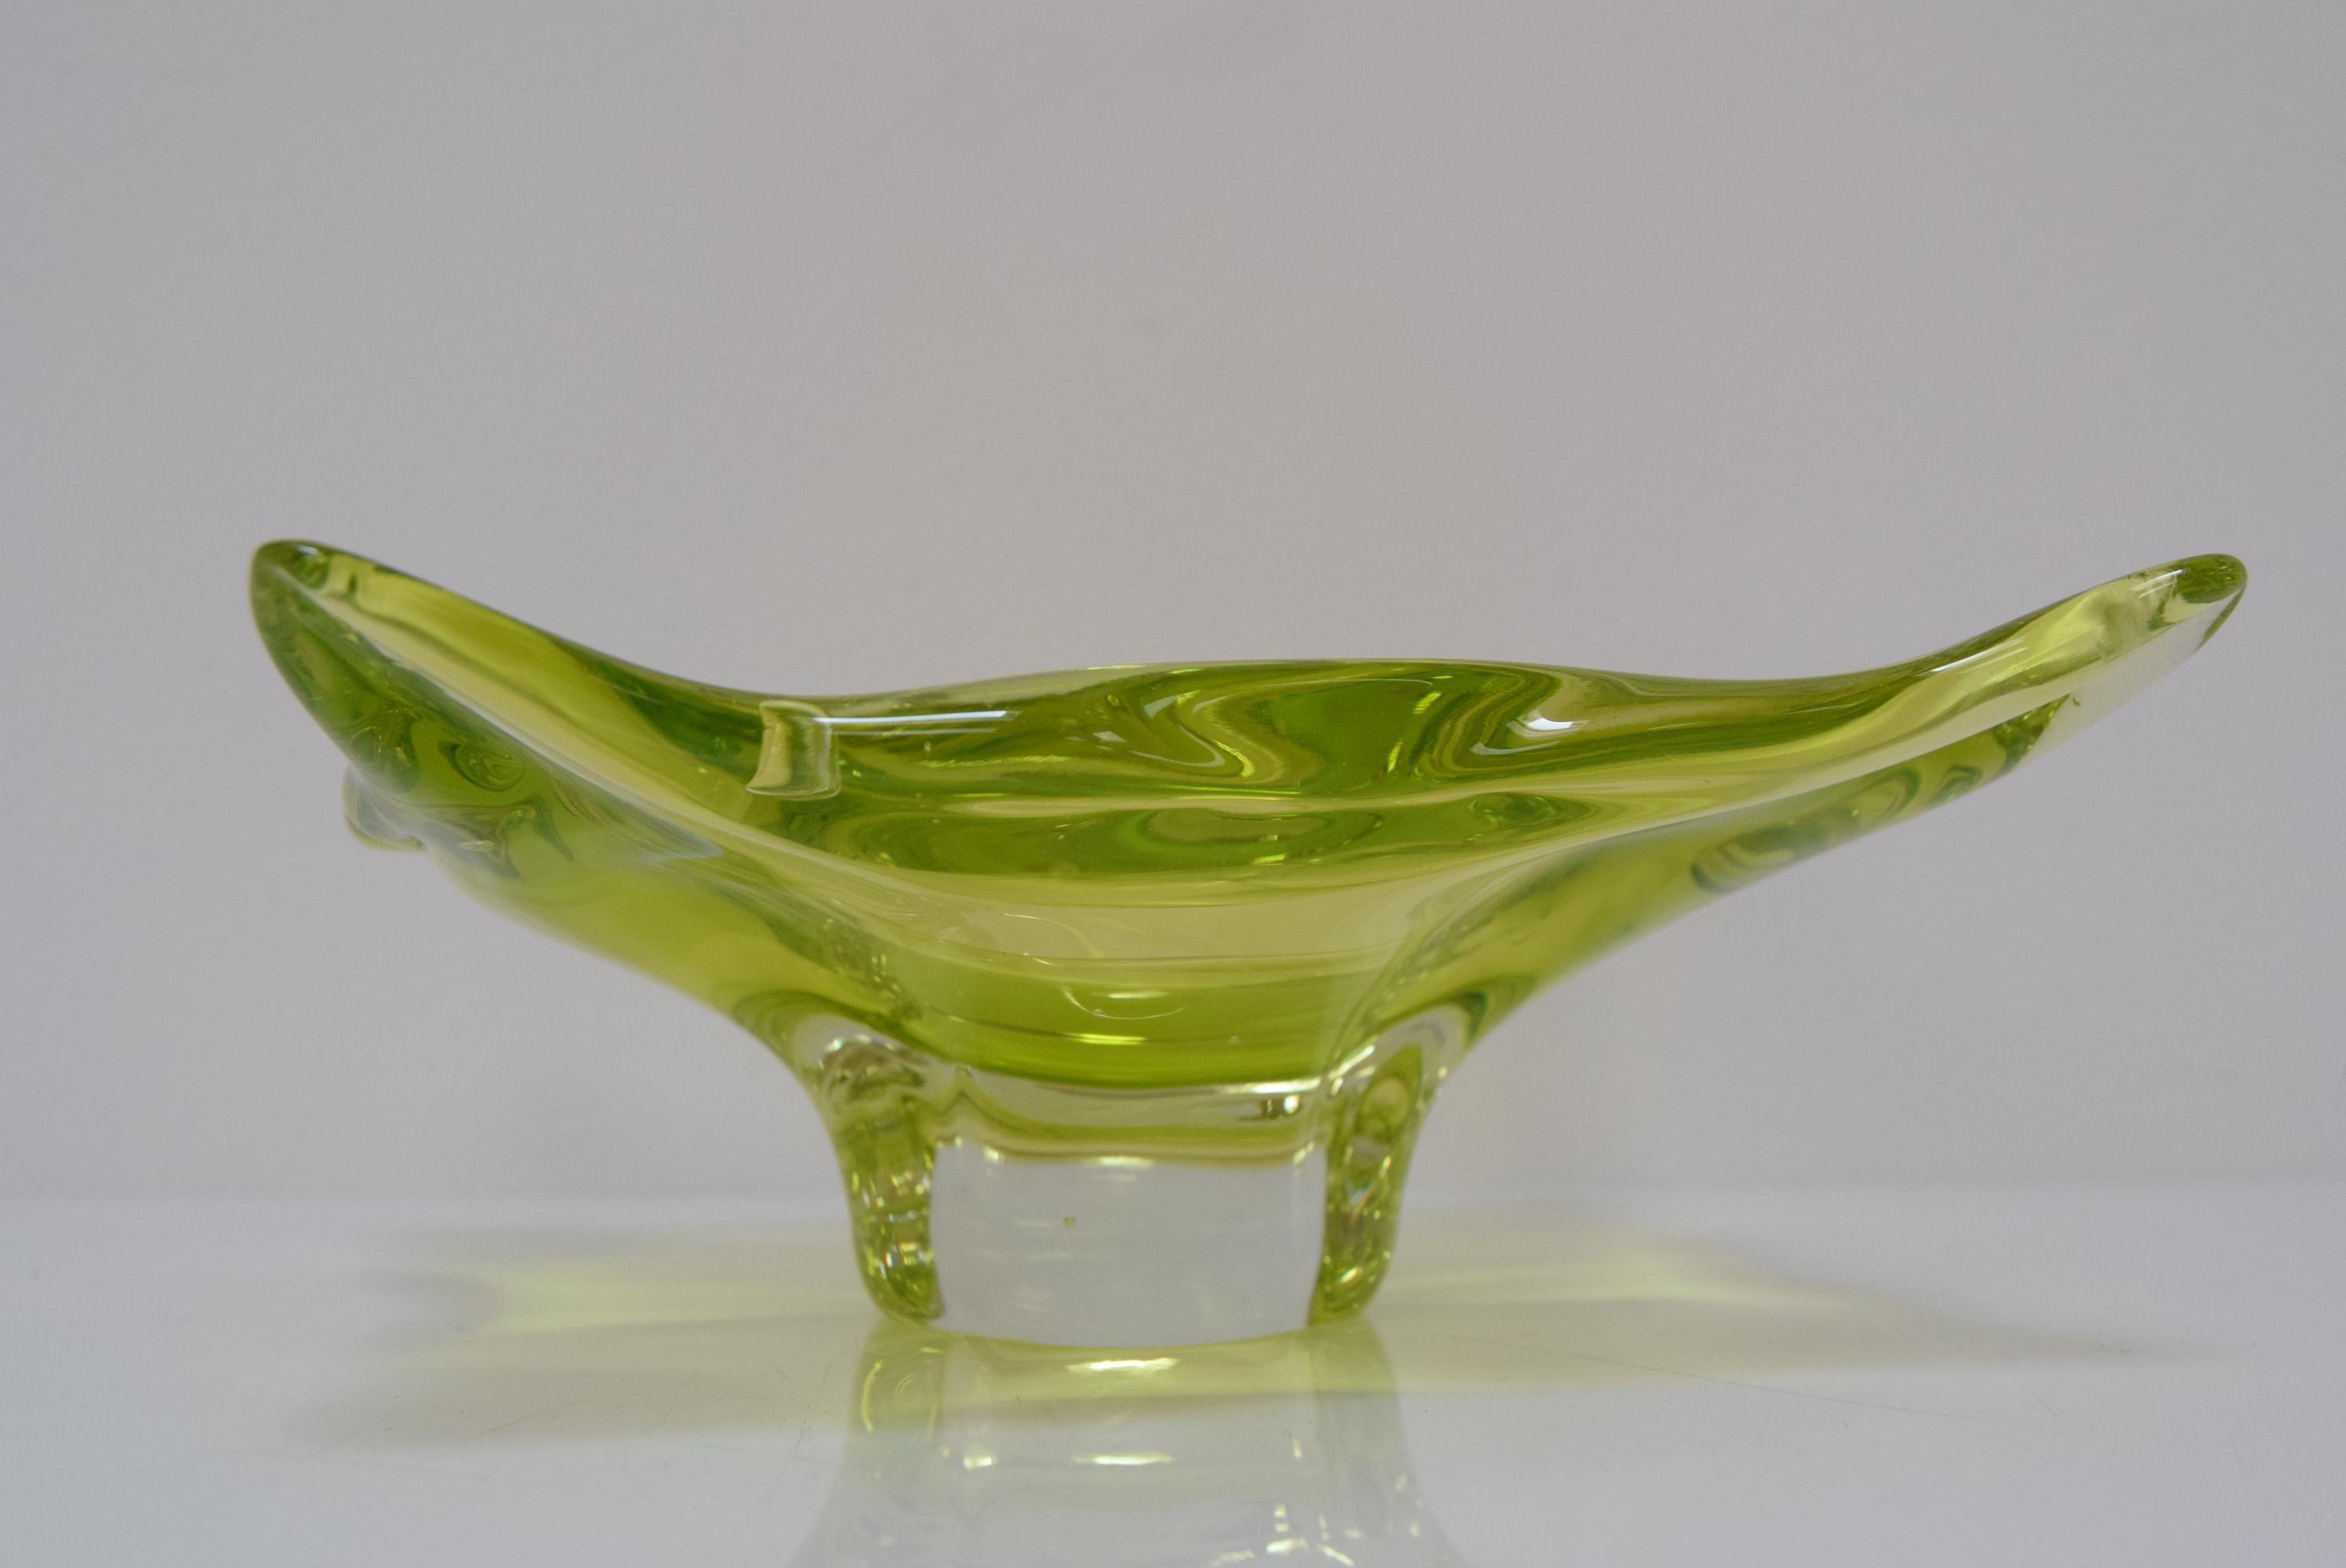 Made in Czechoslovakia
Made of Art Glass
Re-polished
Good Original condition.